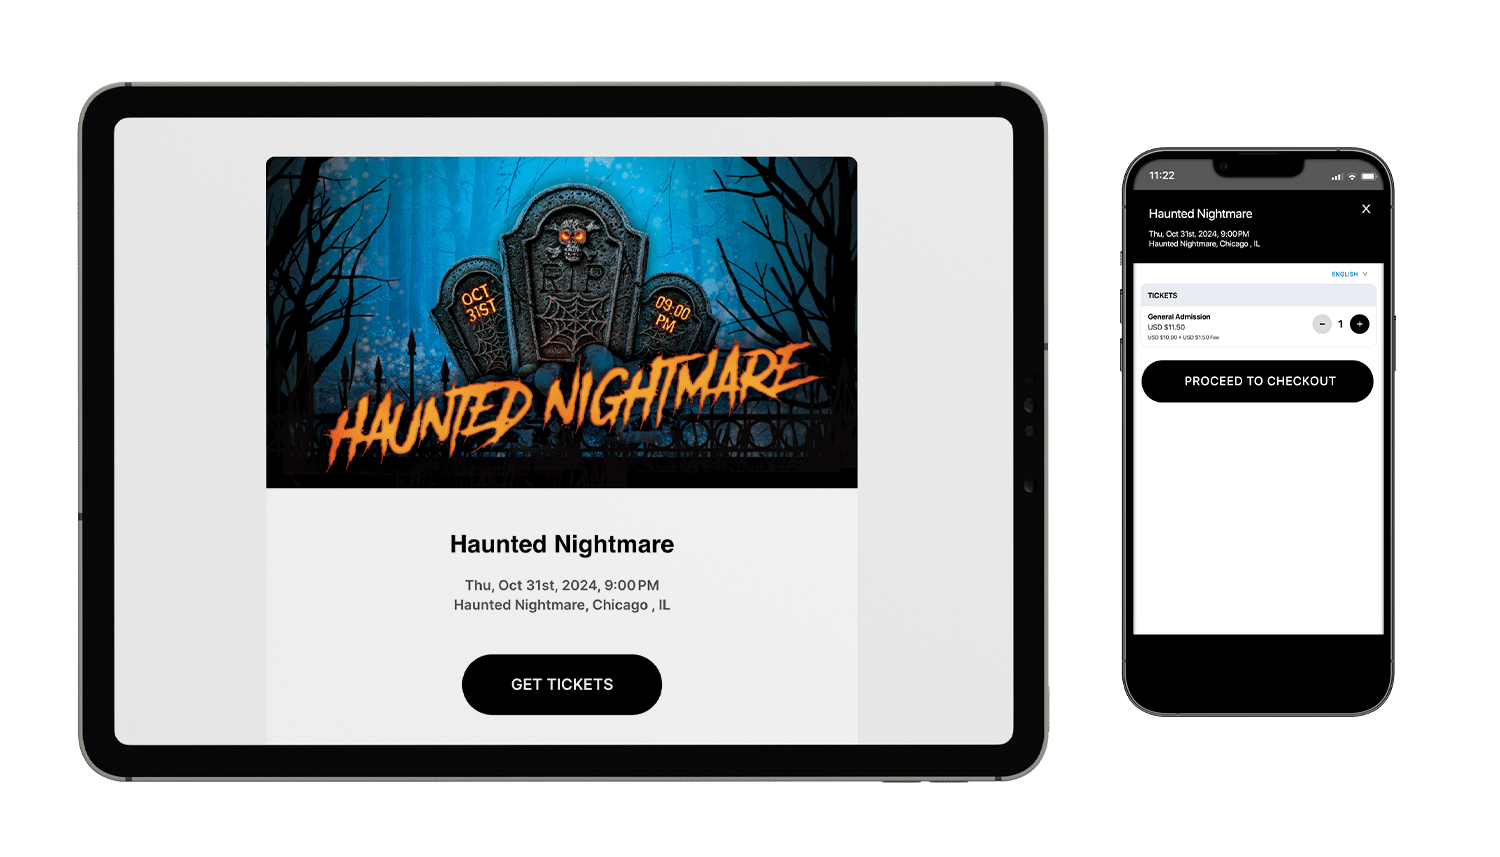 An event mockup of Haunted Nightmare on a tablet and mobile phone